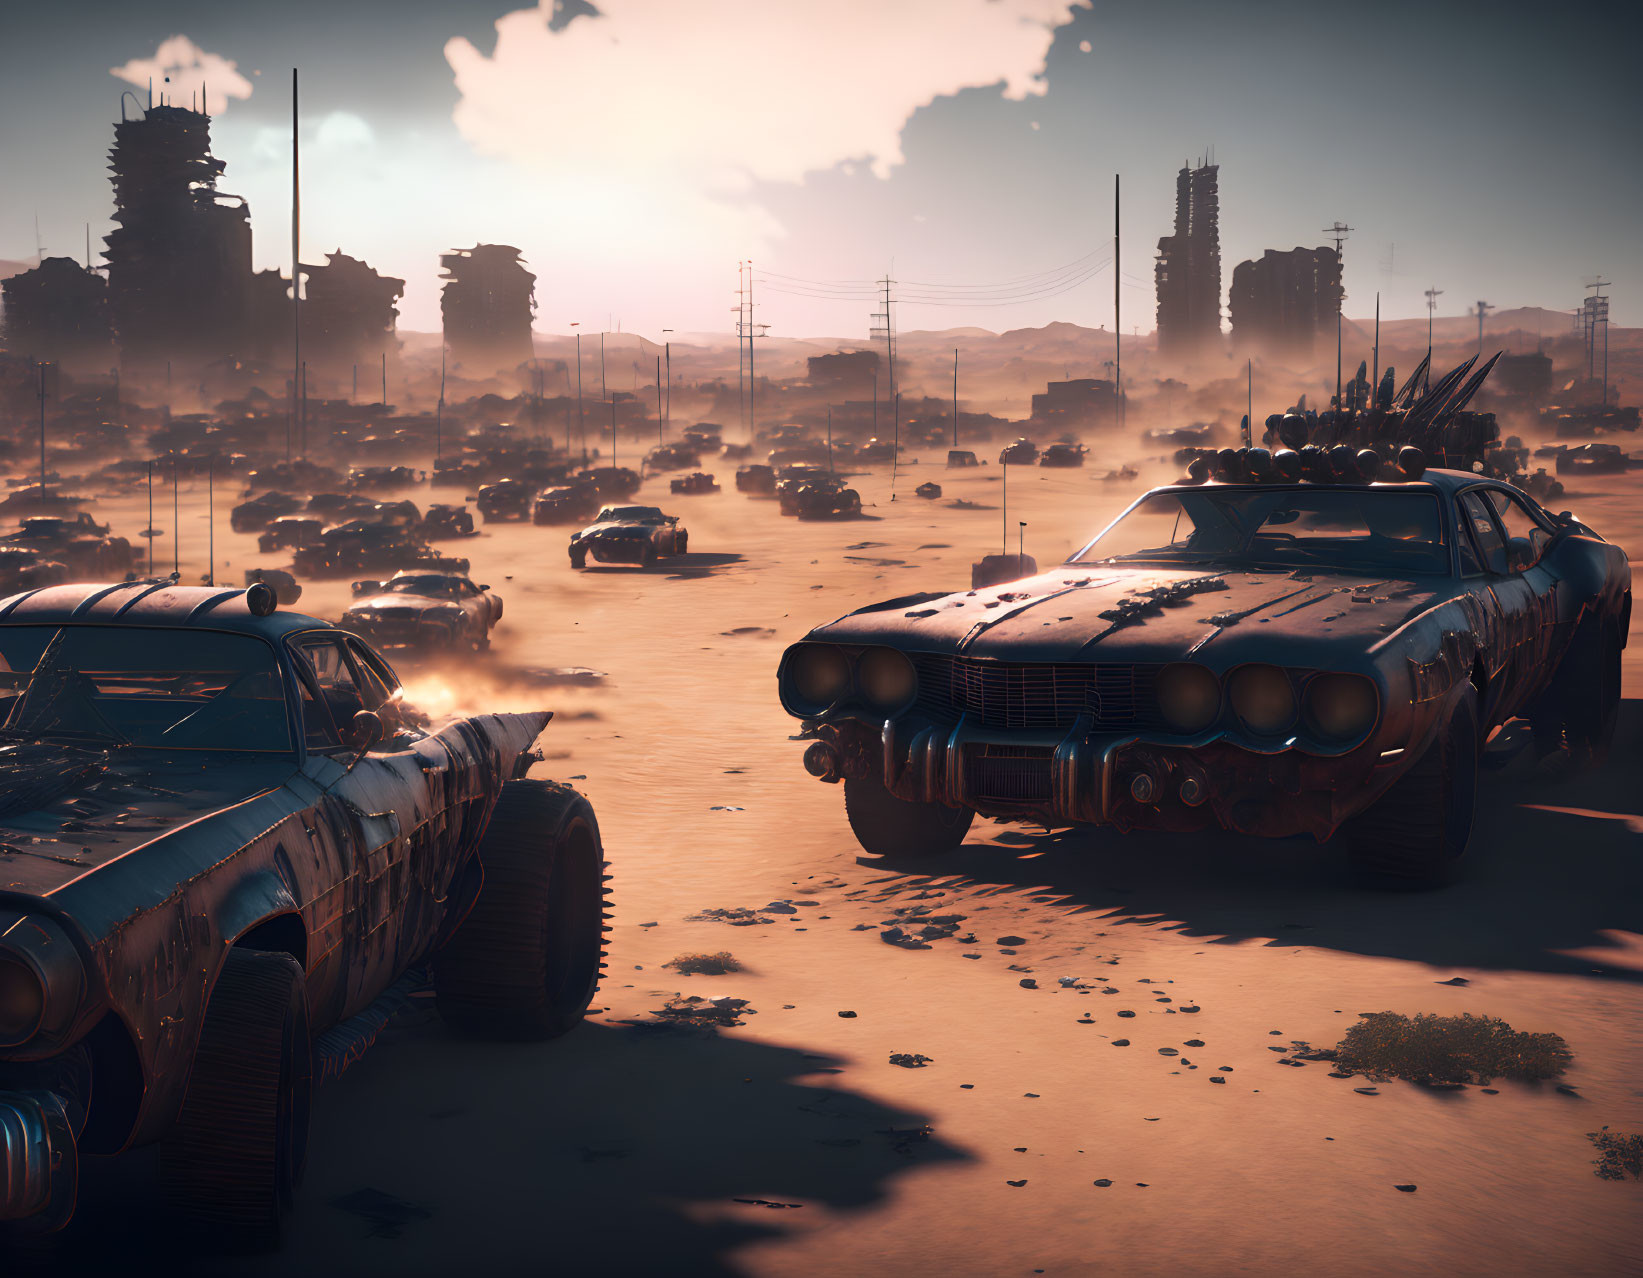 Destroyed city Mad Max style